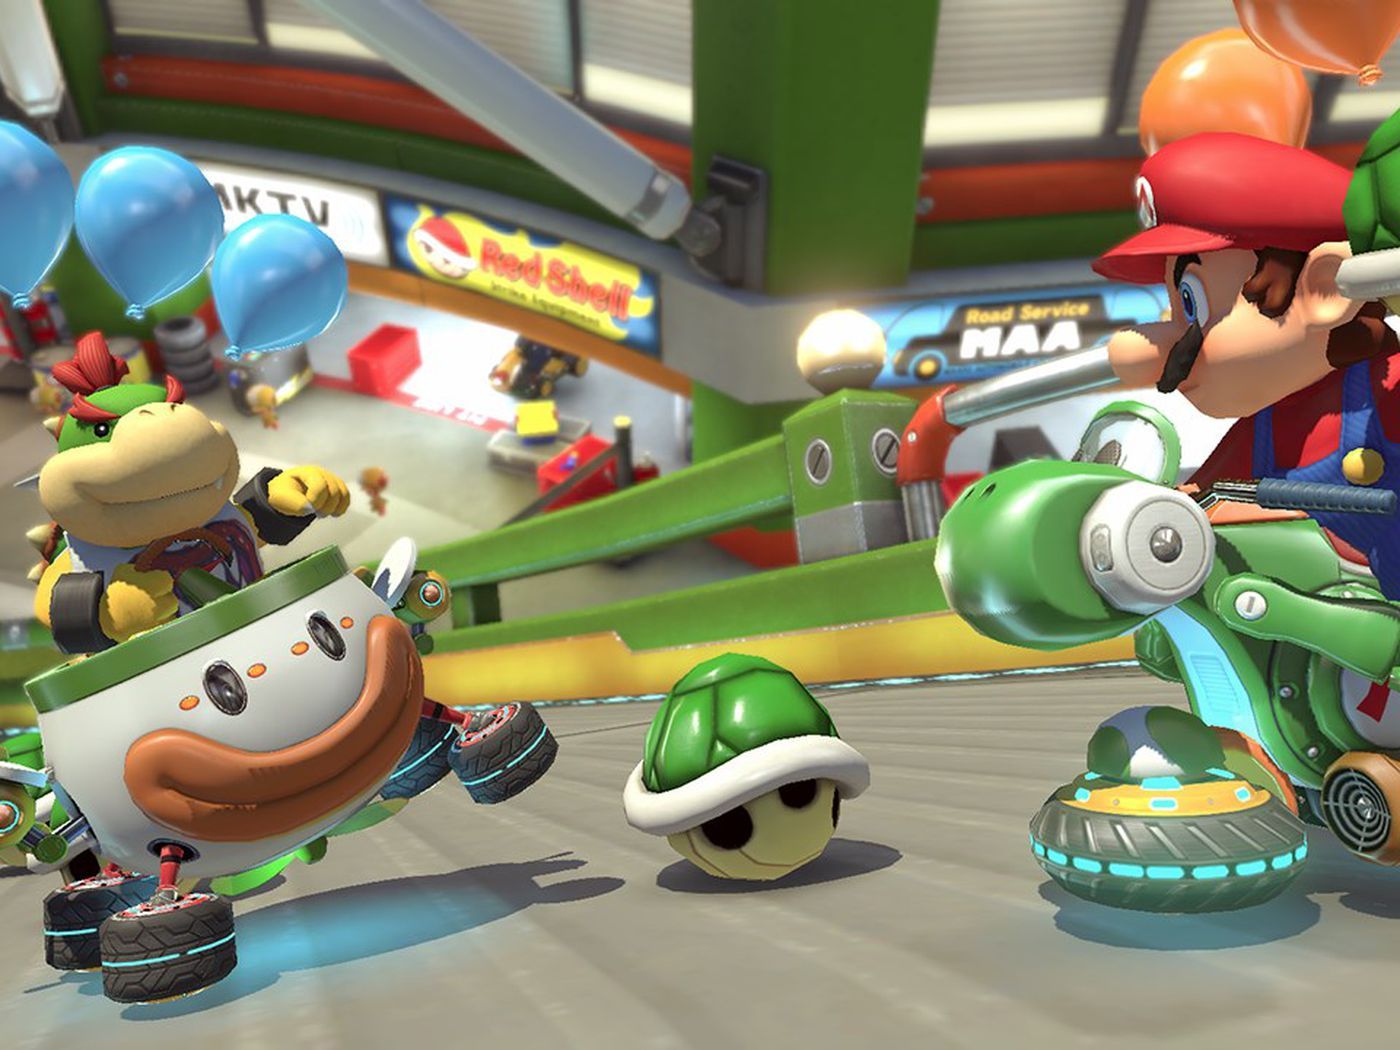 Mario Kart 8 Deluxe throws it back to the series' best entry